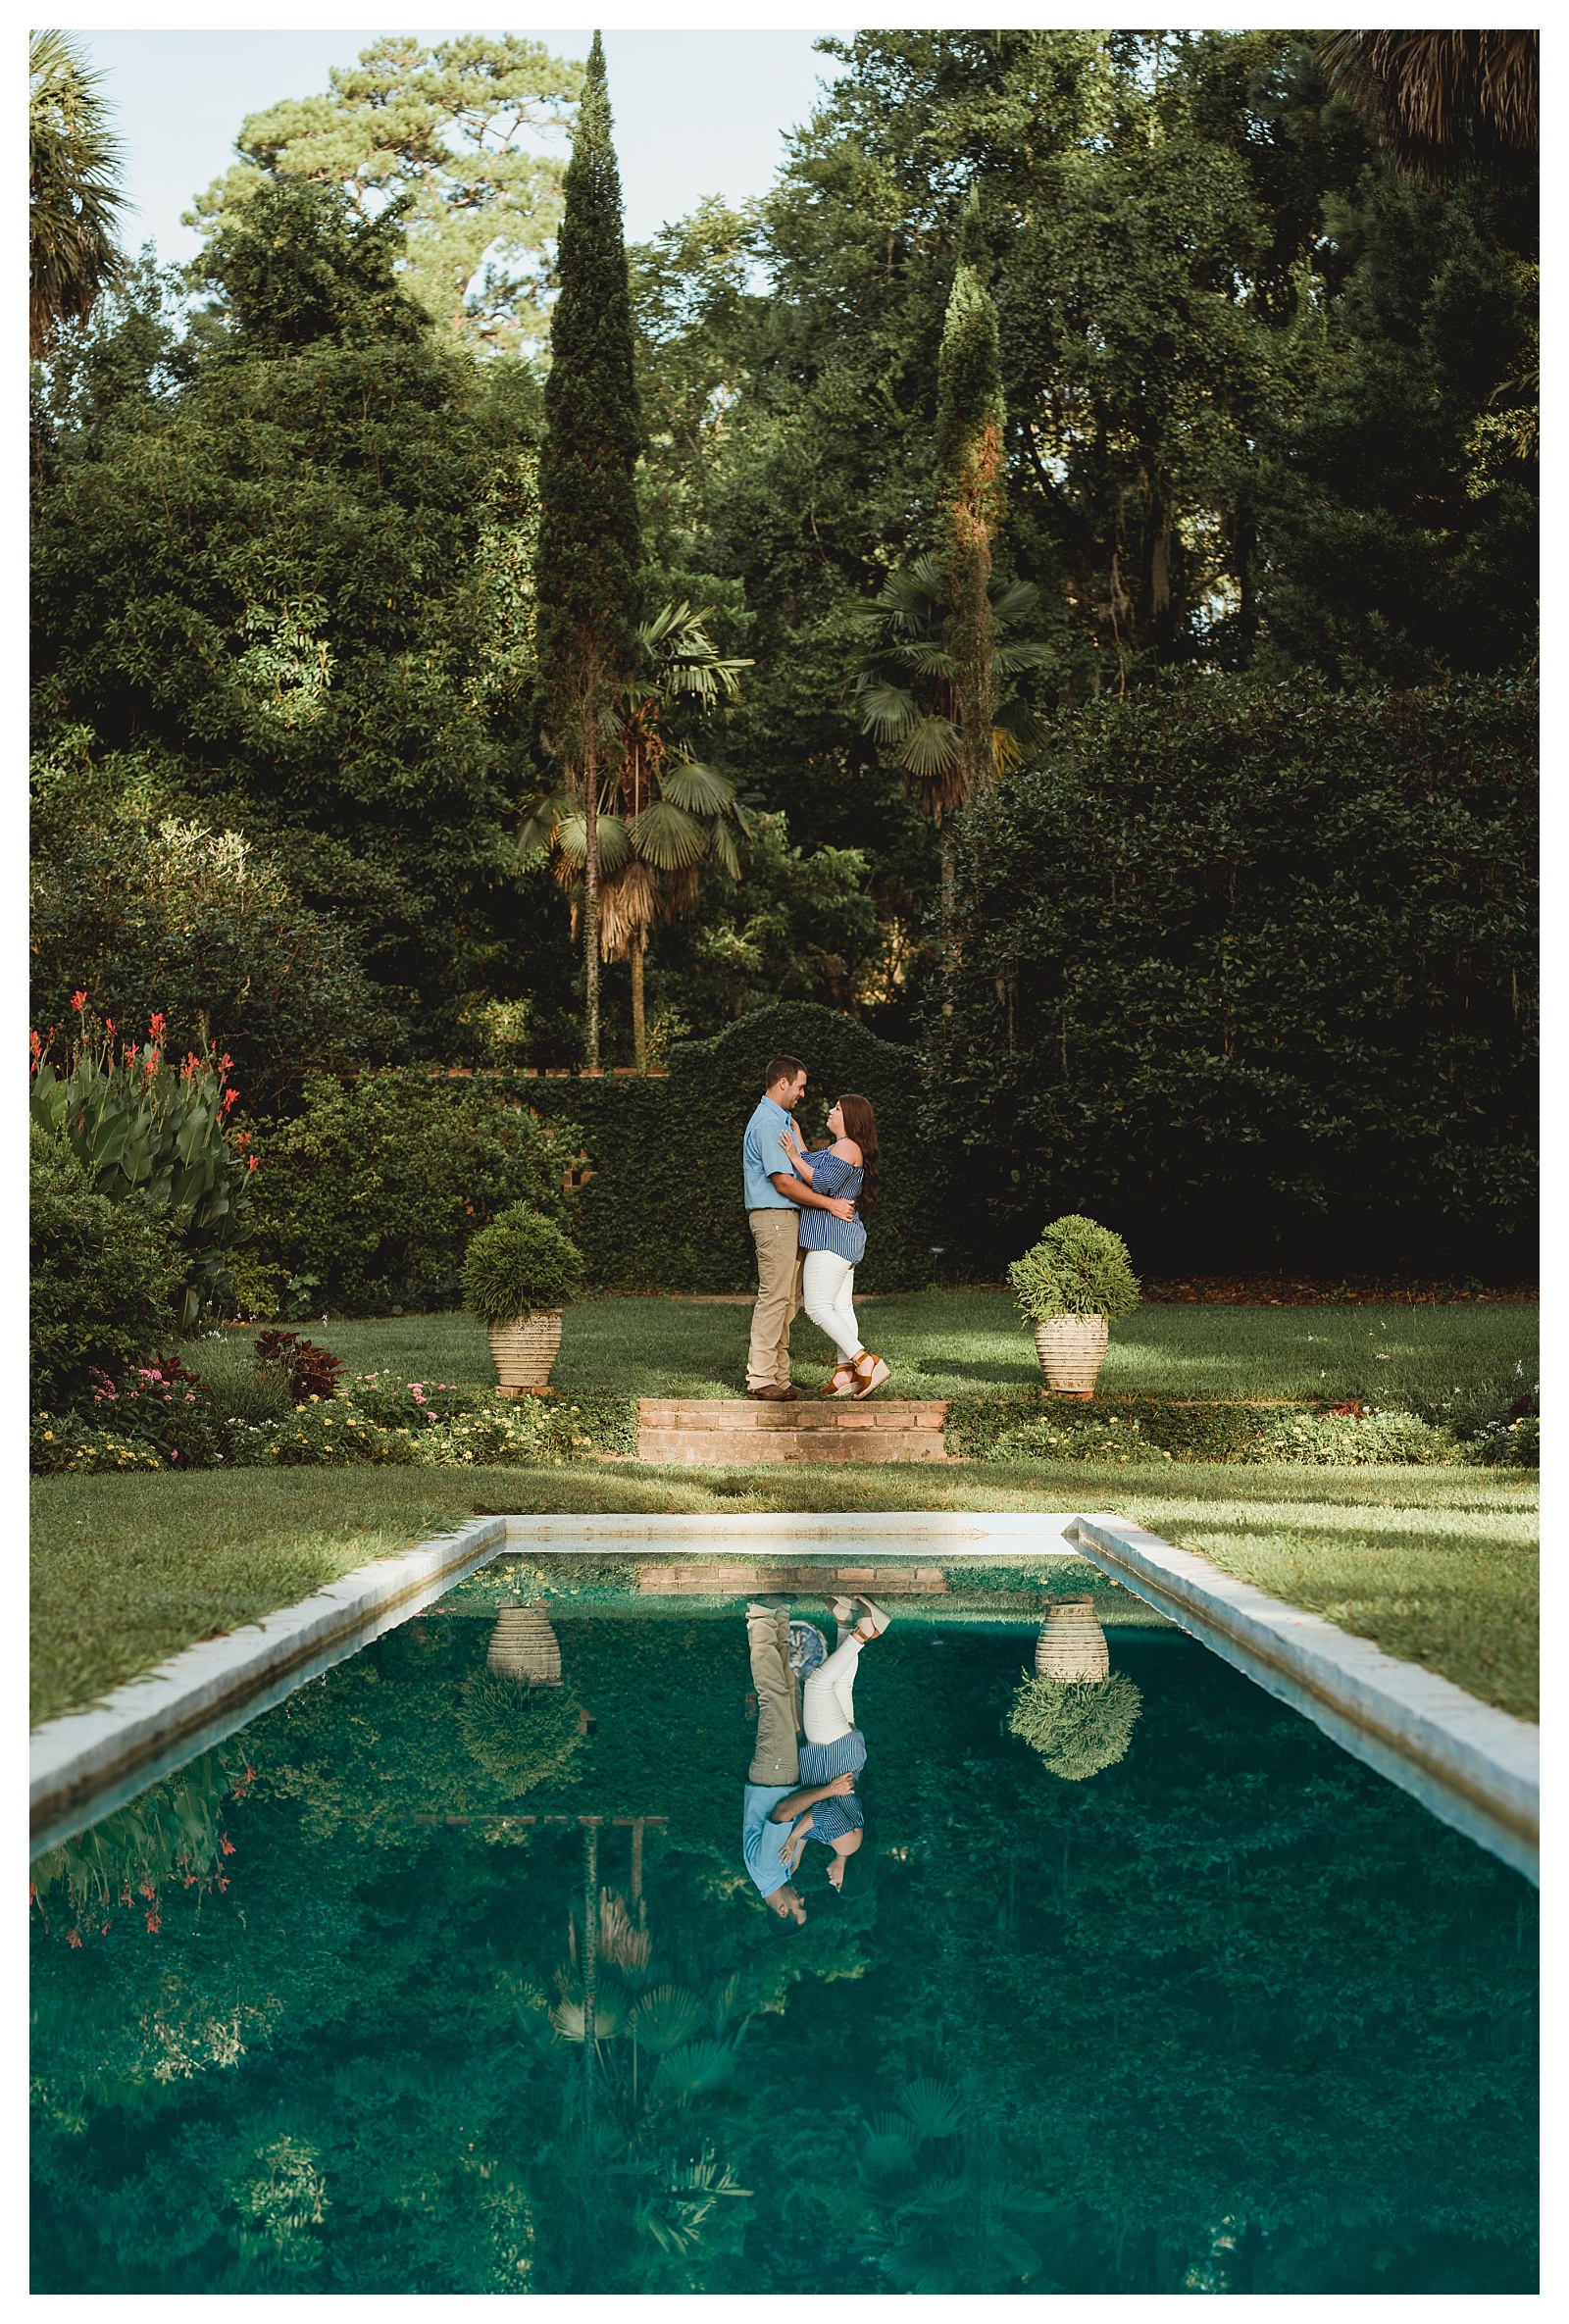 Maclay gardens engagement portraits in northwest florida. Shelly Williams Photography